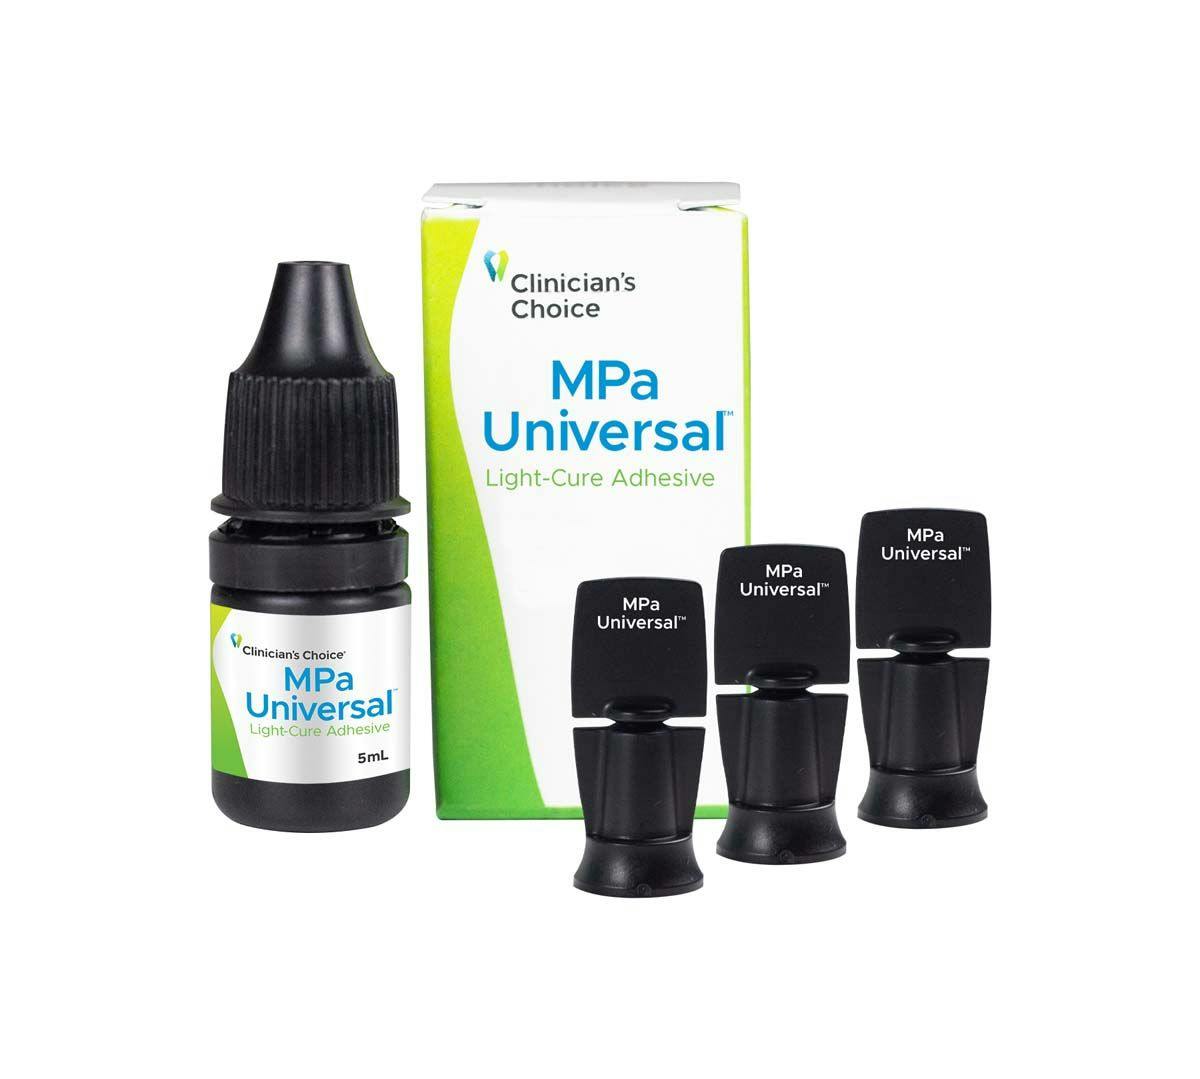 MPa Universal from Clinician's Choice. Image credit: © Clinician's Choice